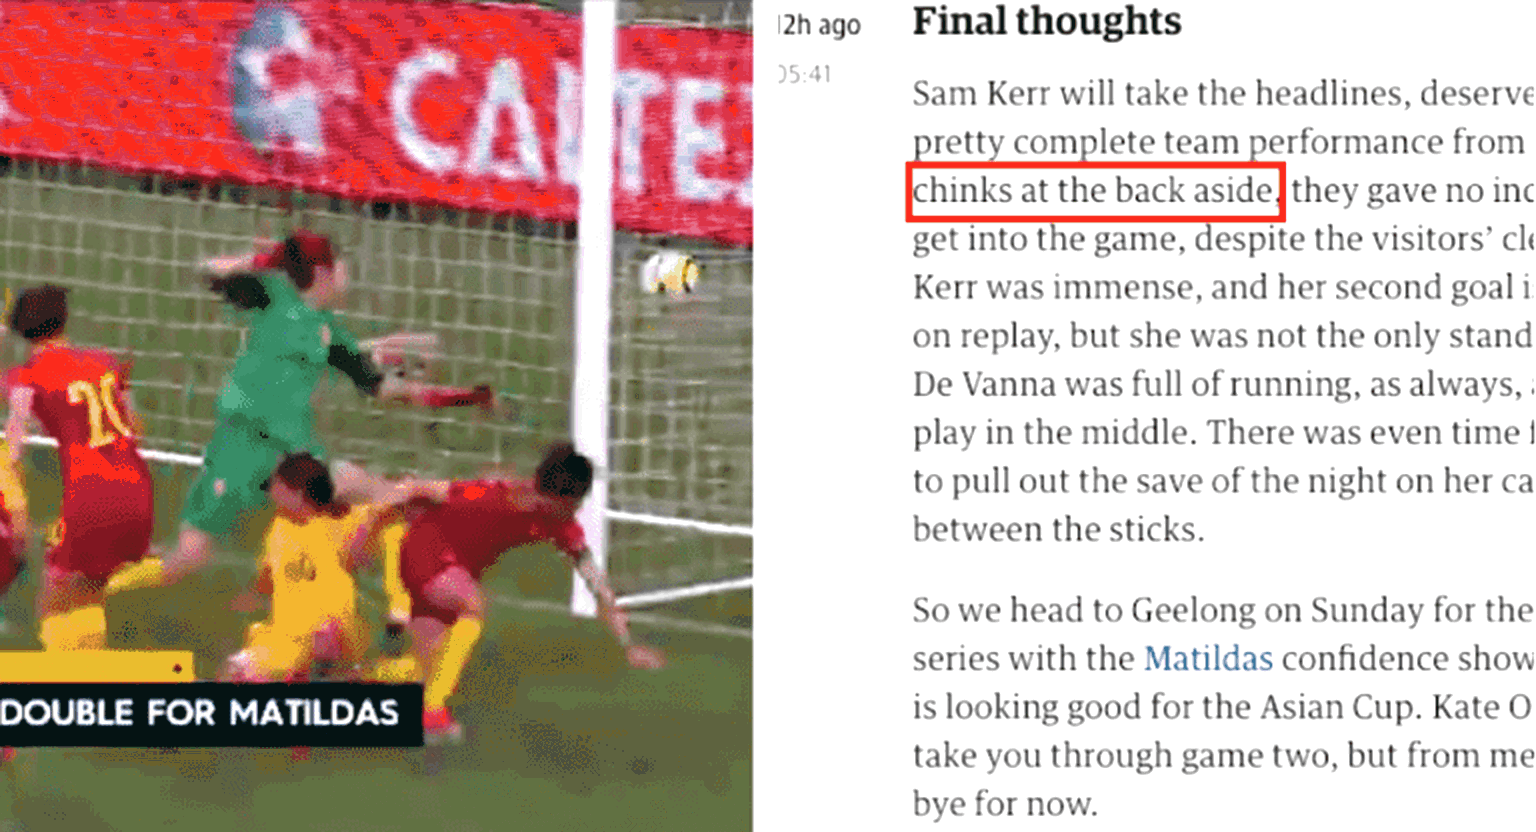 The Guardian Under Fire For Racism After Using ‘Chinks’ in Football Match Coverage